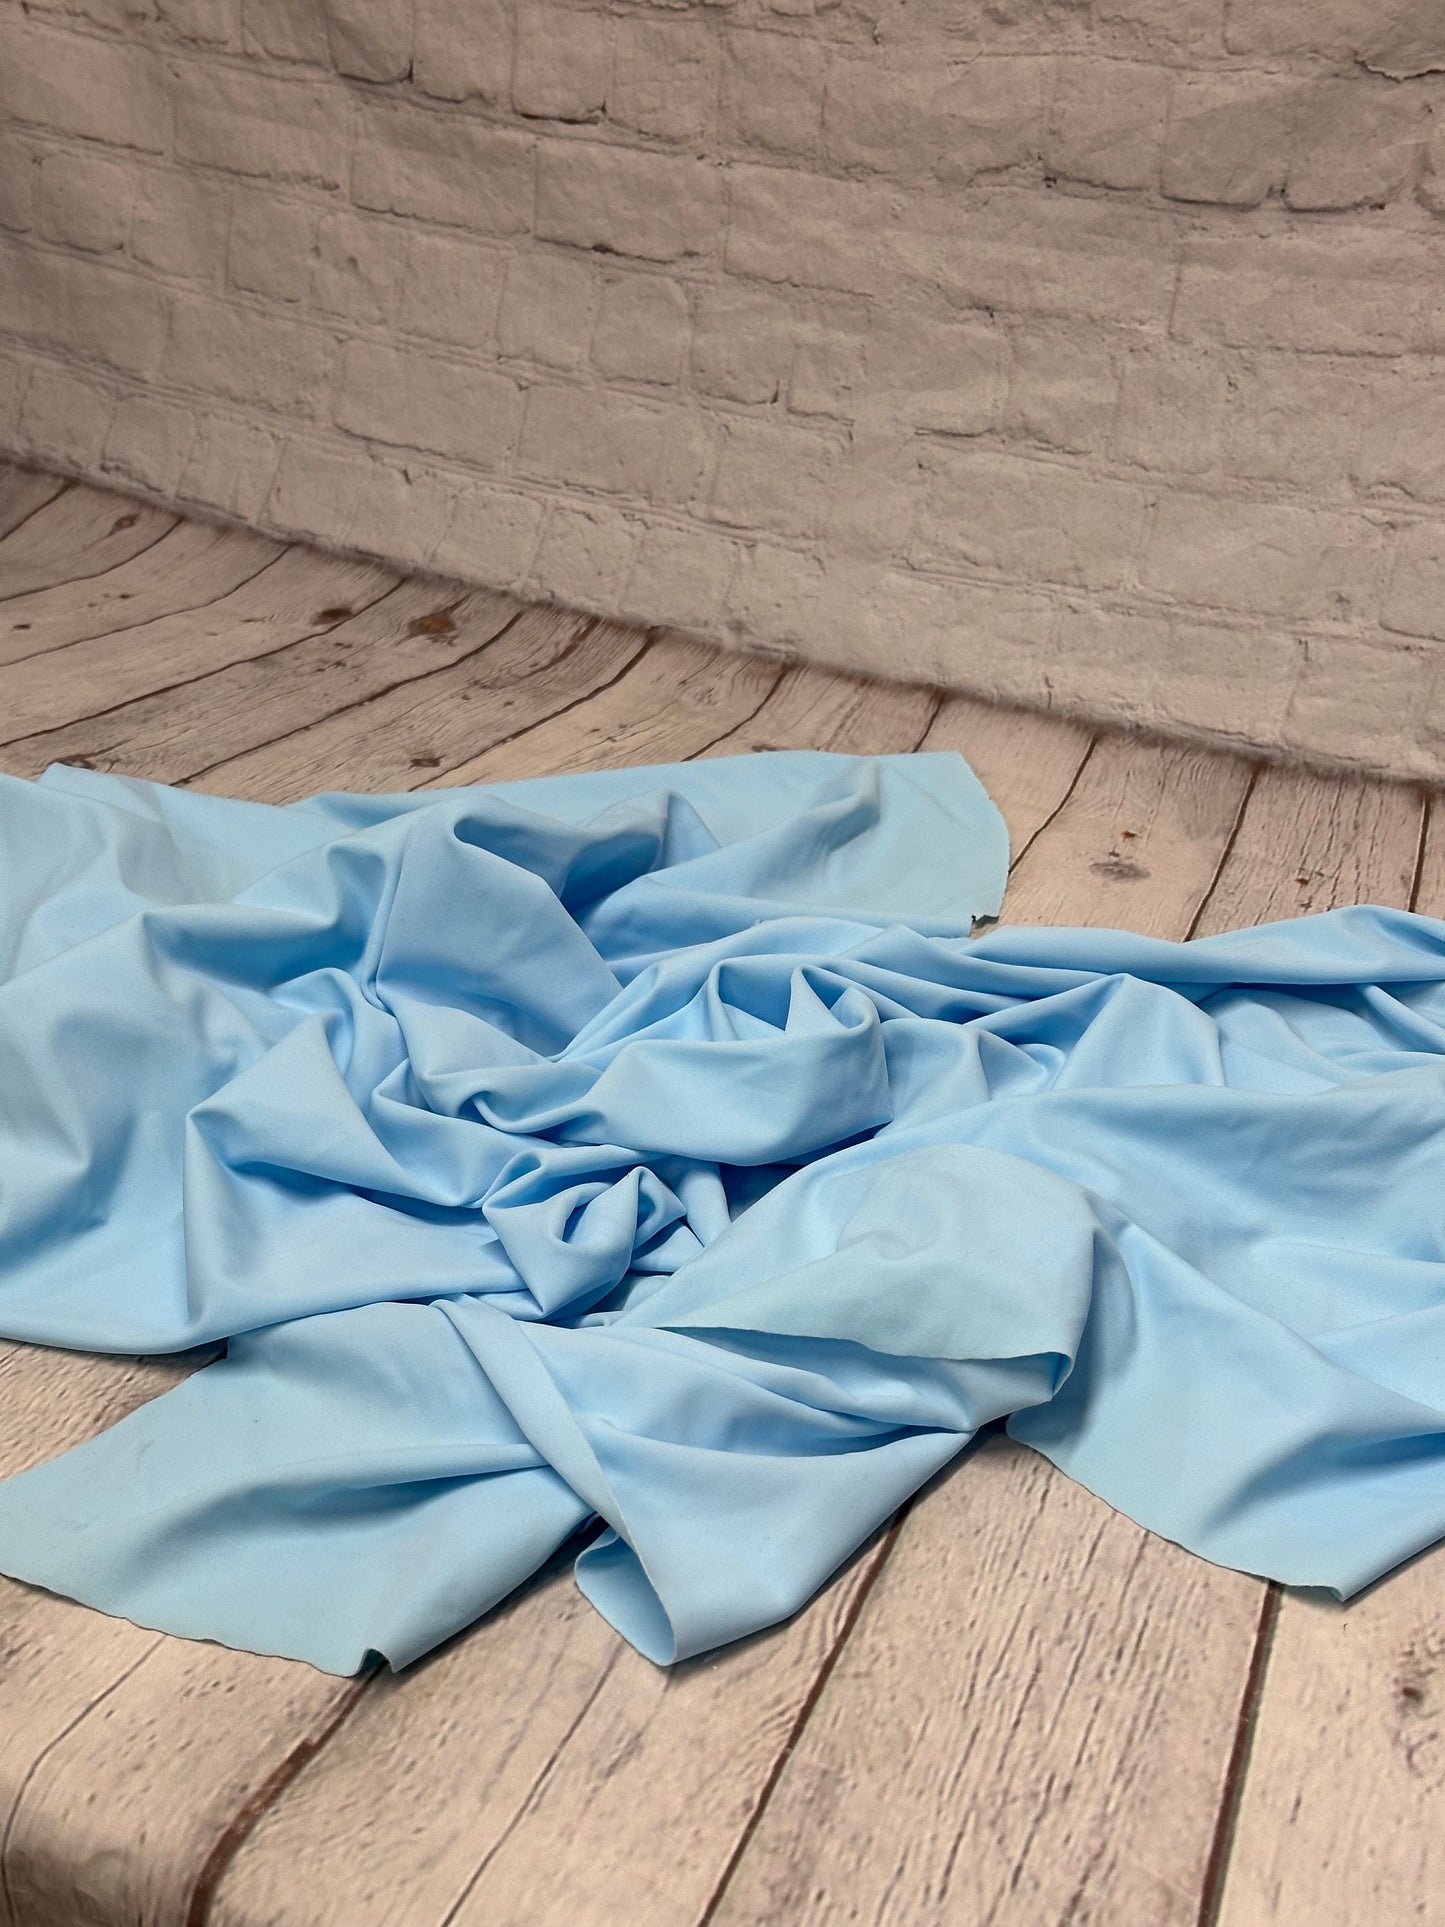 Nylon Spandex Tricot Solid Swimwear Activewear Fabric  By The Yard Light Blue Shades Hue